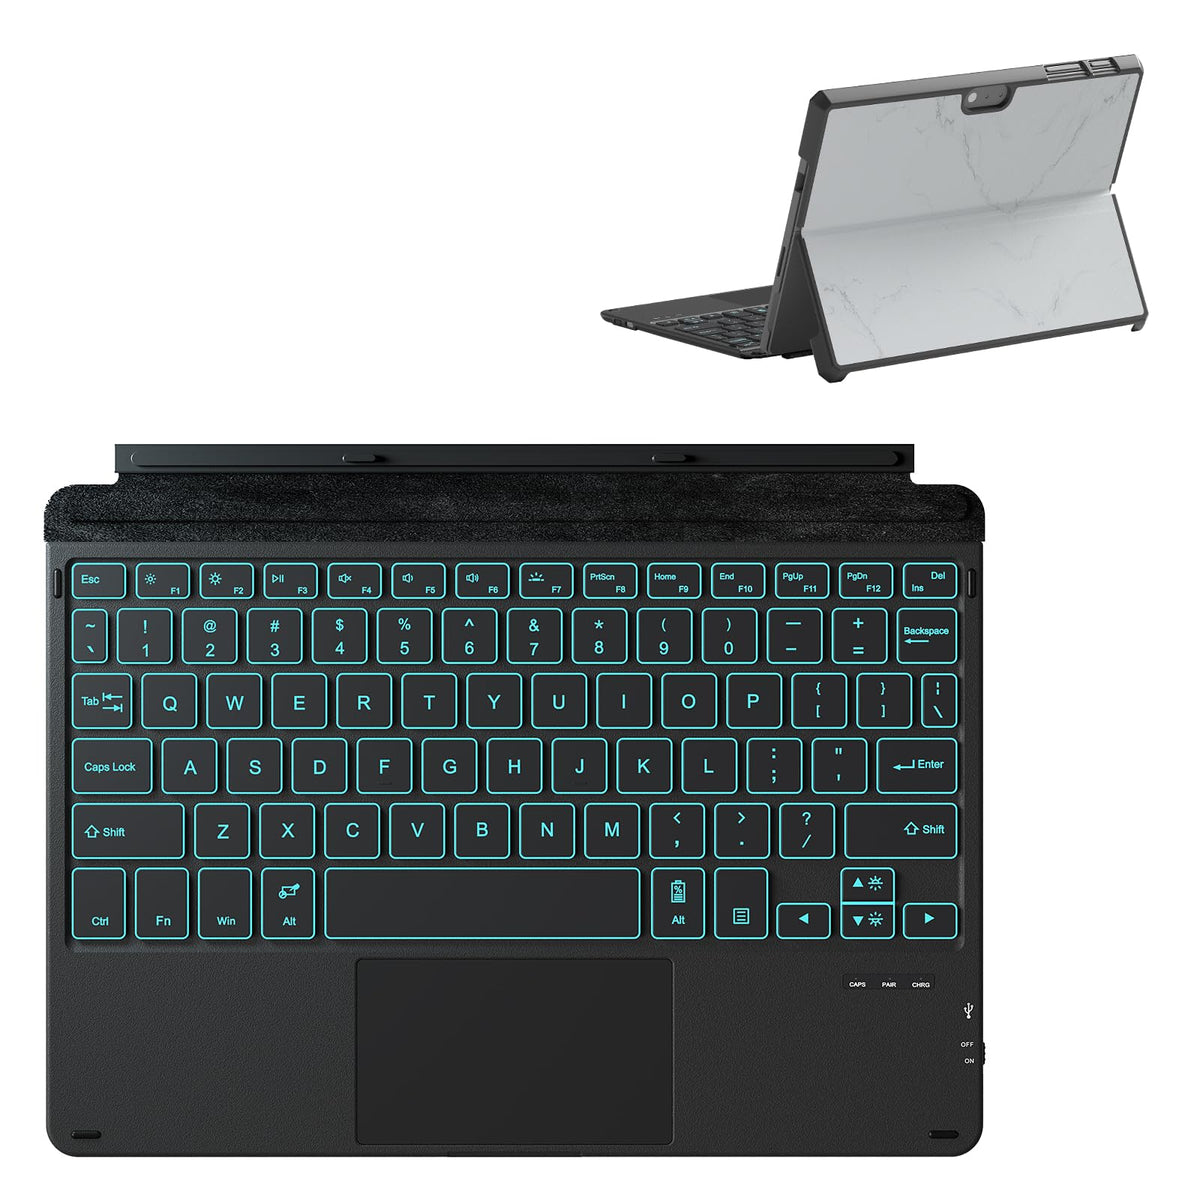 Qulose Keyboard Case for Surface Go 3 / Surface Go 2 / Surface Go, 7 Color Backlight Magnetic Detachable Bluetooth Keyboard with Trackpad, Rechargeable Keyboard for Surface Go - Black